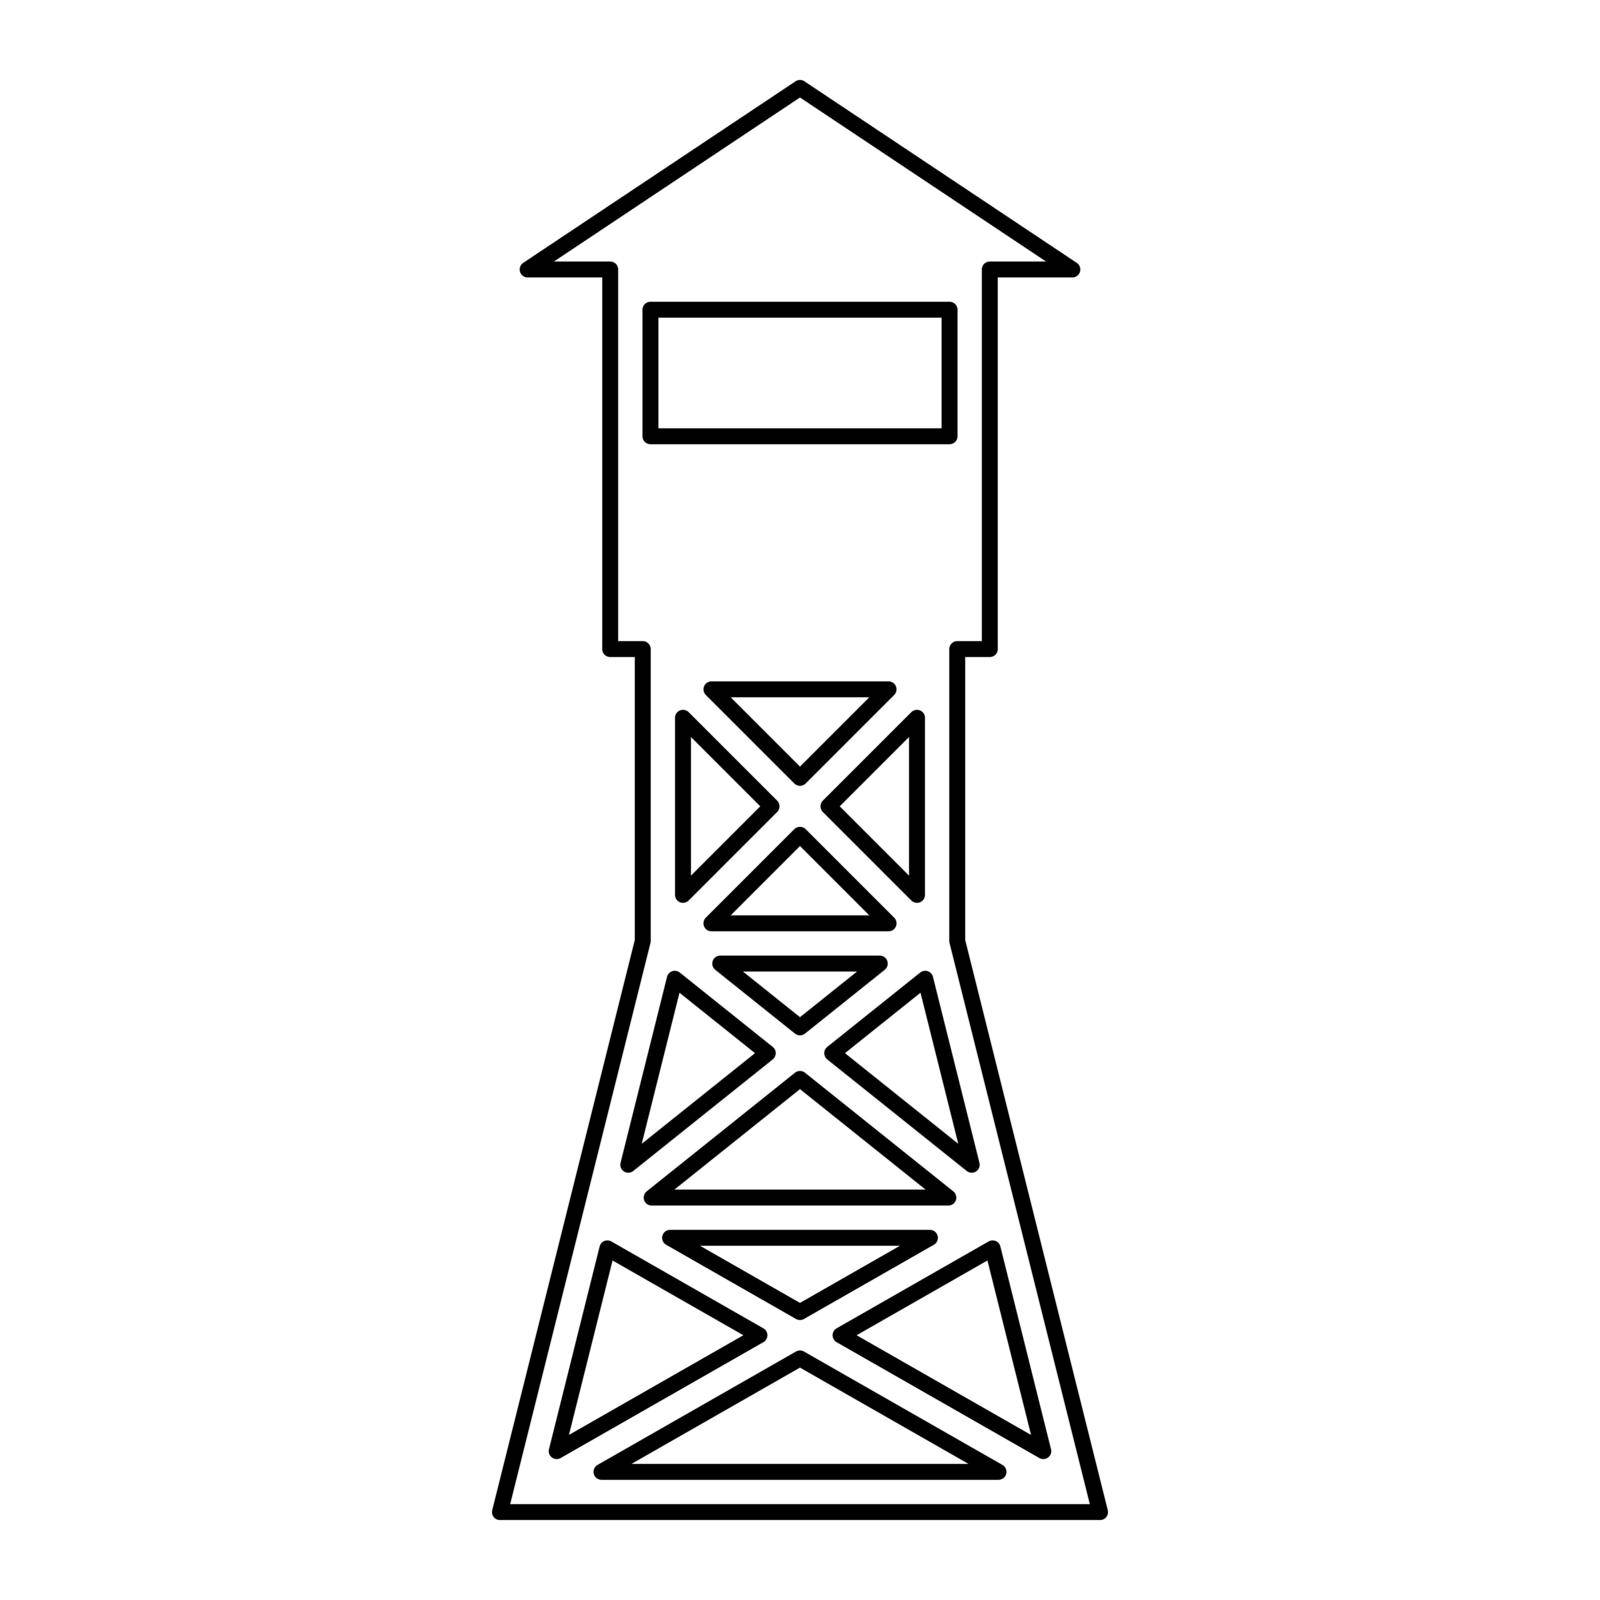 Watching tower Overview forest ranger fire site contour outline icon black color vector illustration flat style image by serhii435